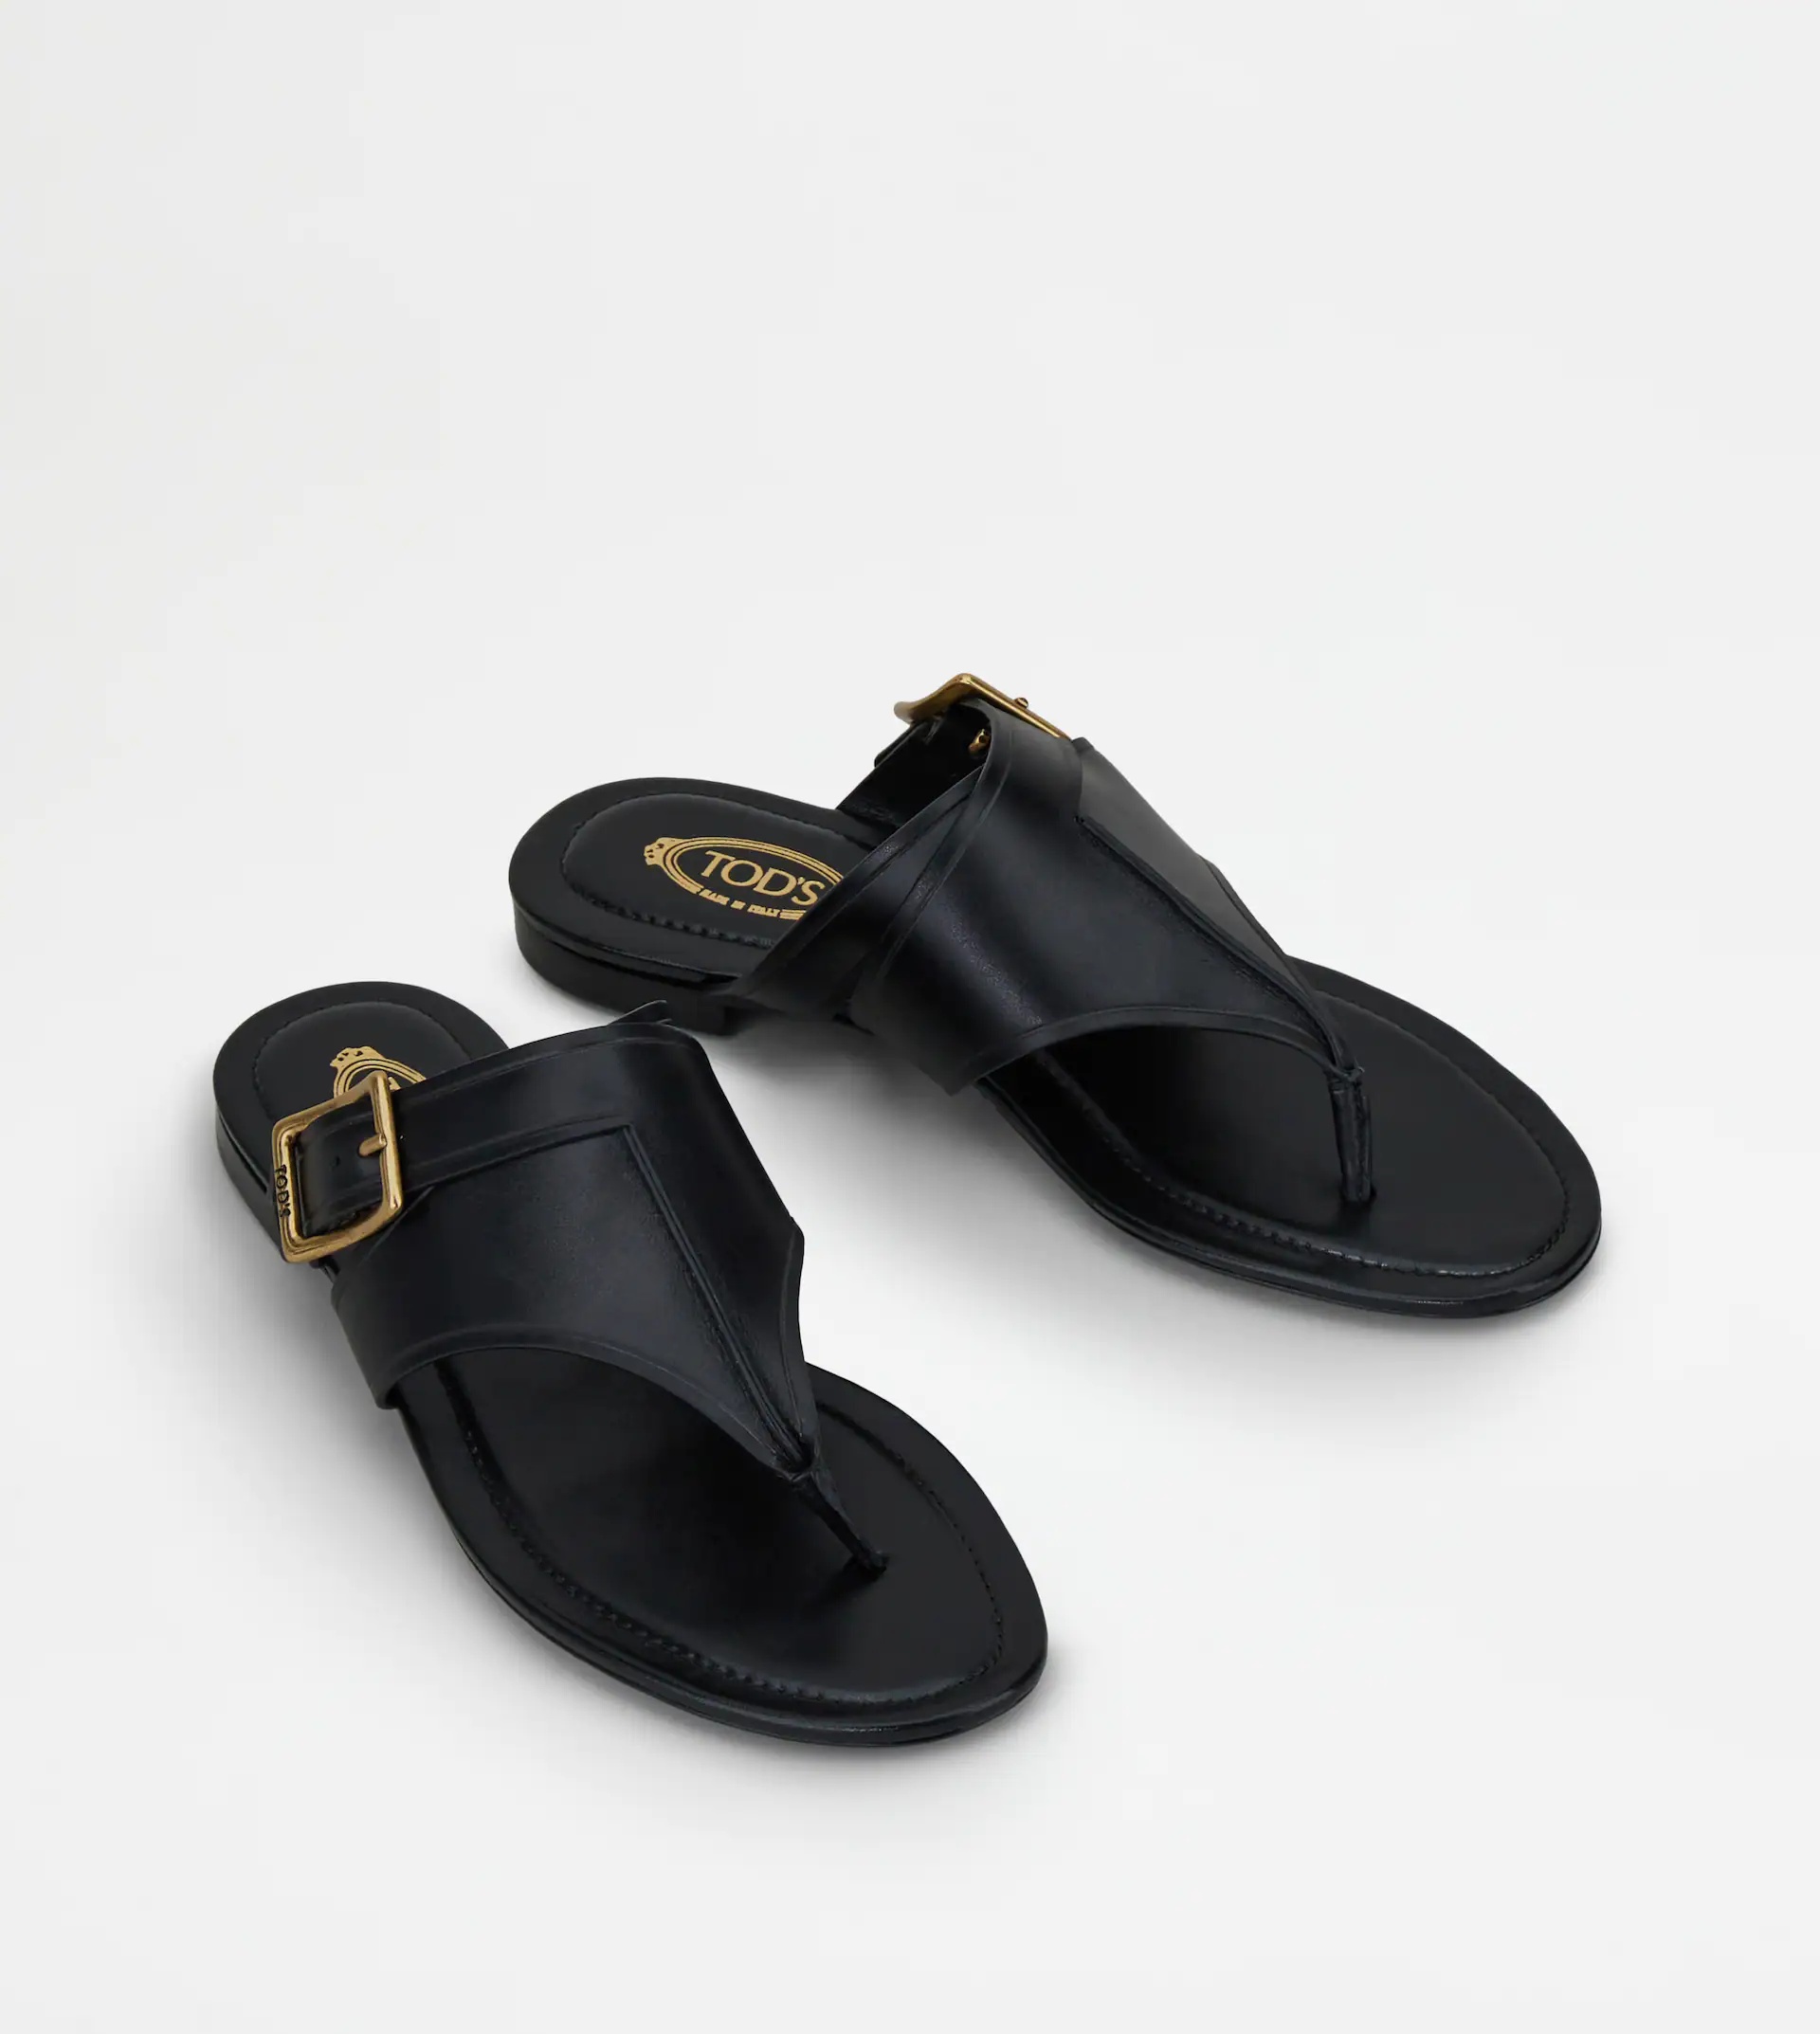 THONG SANDALS IN LEATHER - BLACK - 2